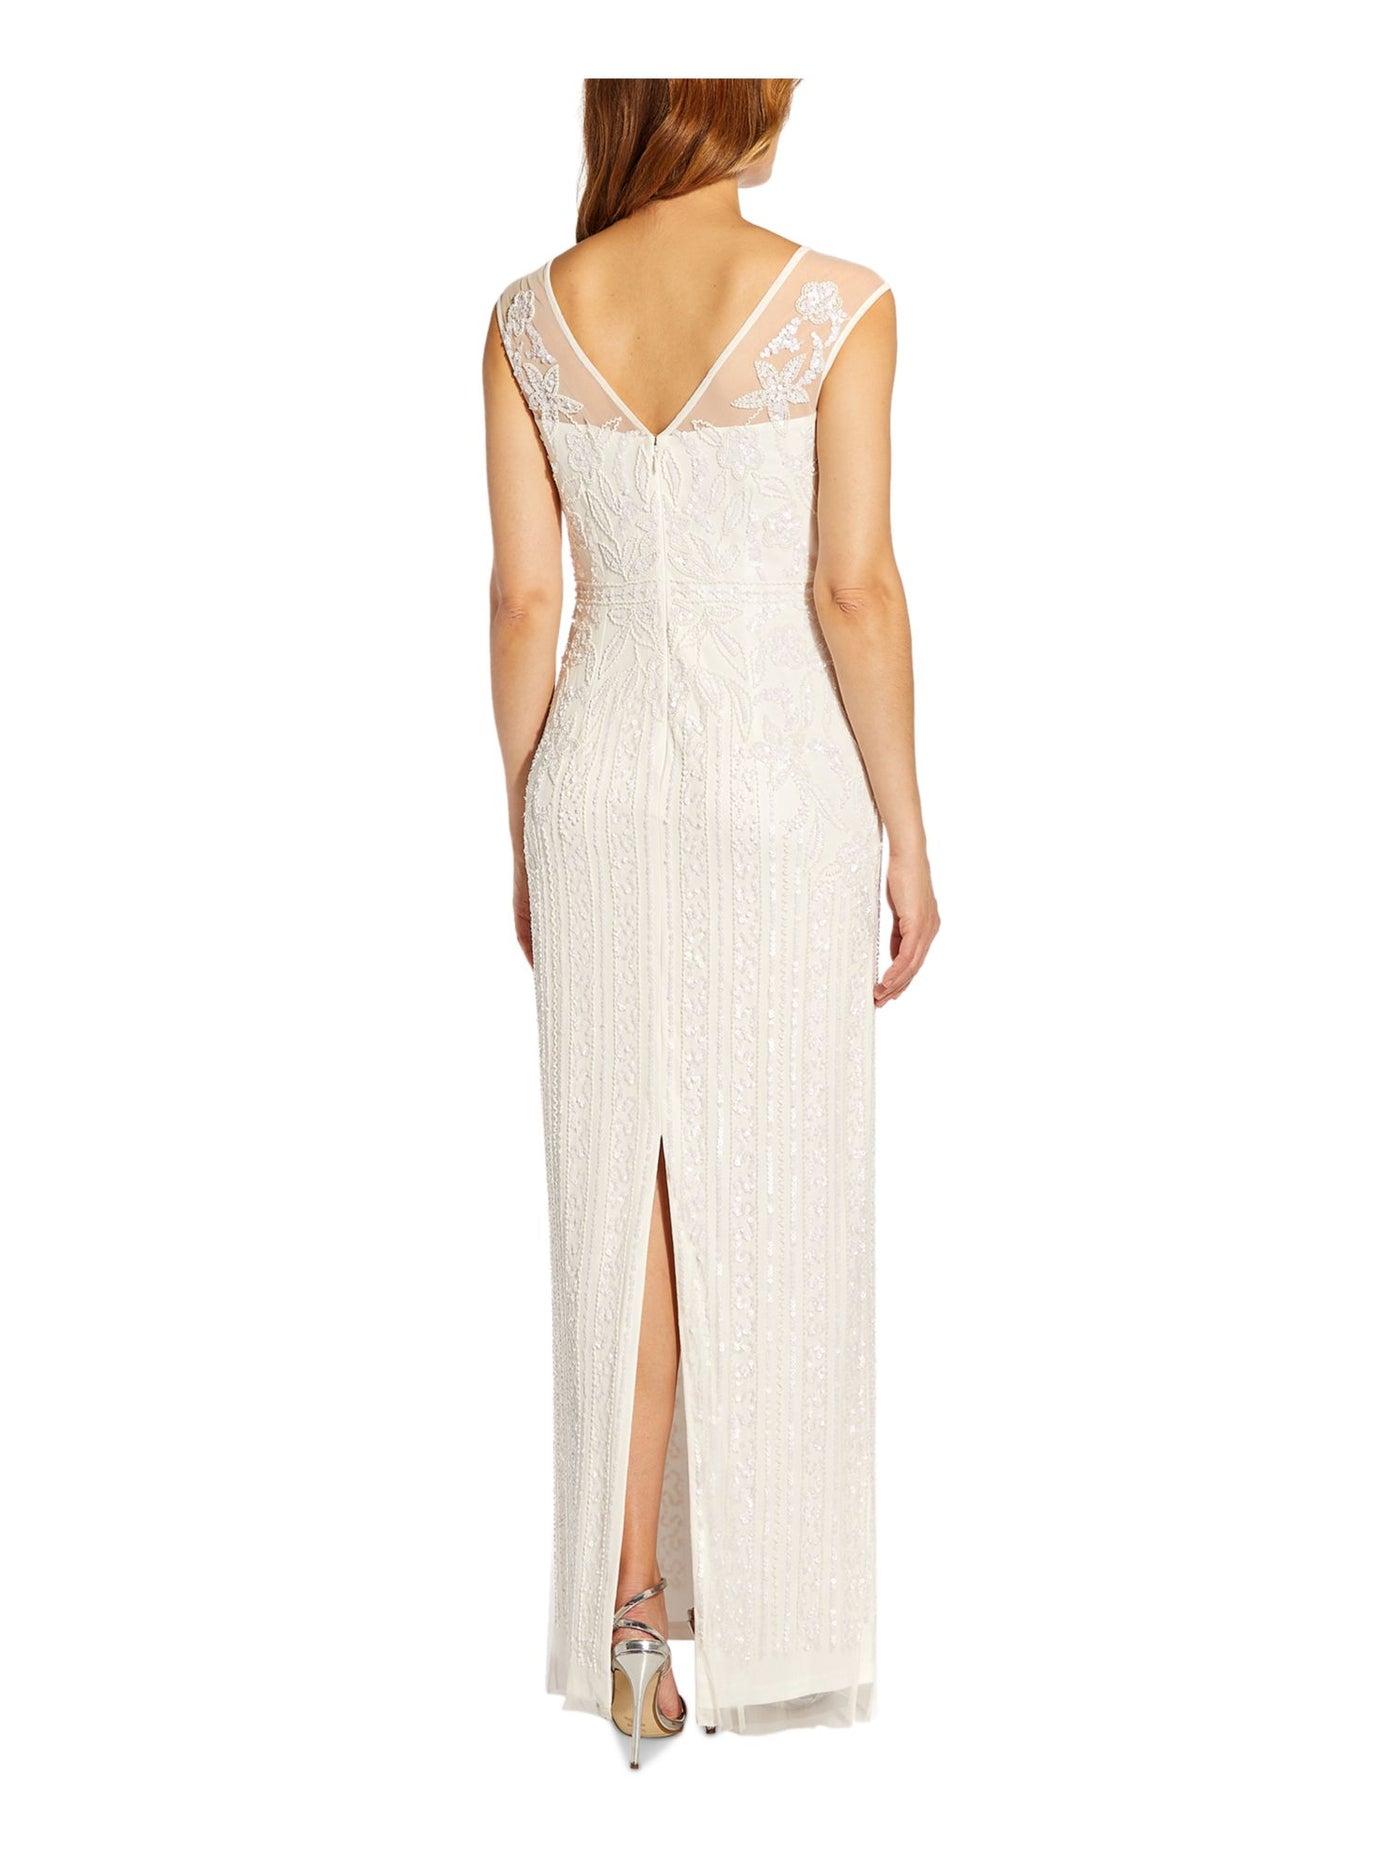 ADRIANNA PAPELL Womens Ivory Embellished Zippered Slit Back Hem Lined Cap Sleeve Illusion Neckline Full-Length Formal Gown Dress 12